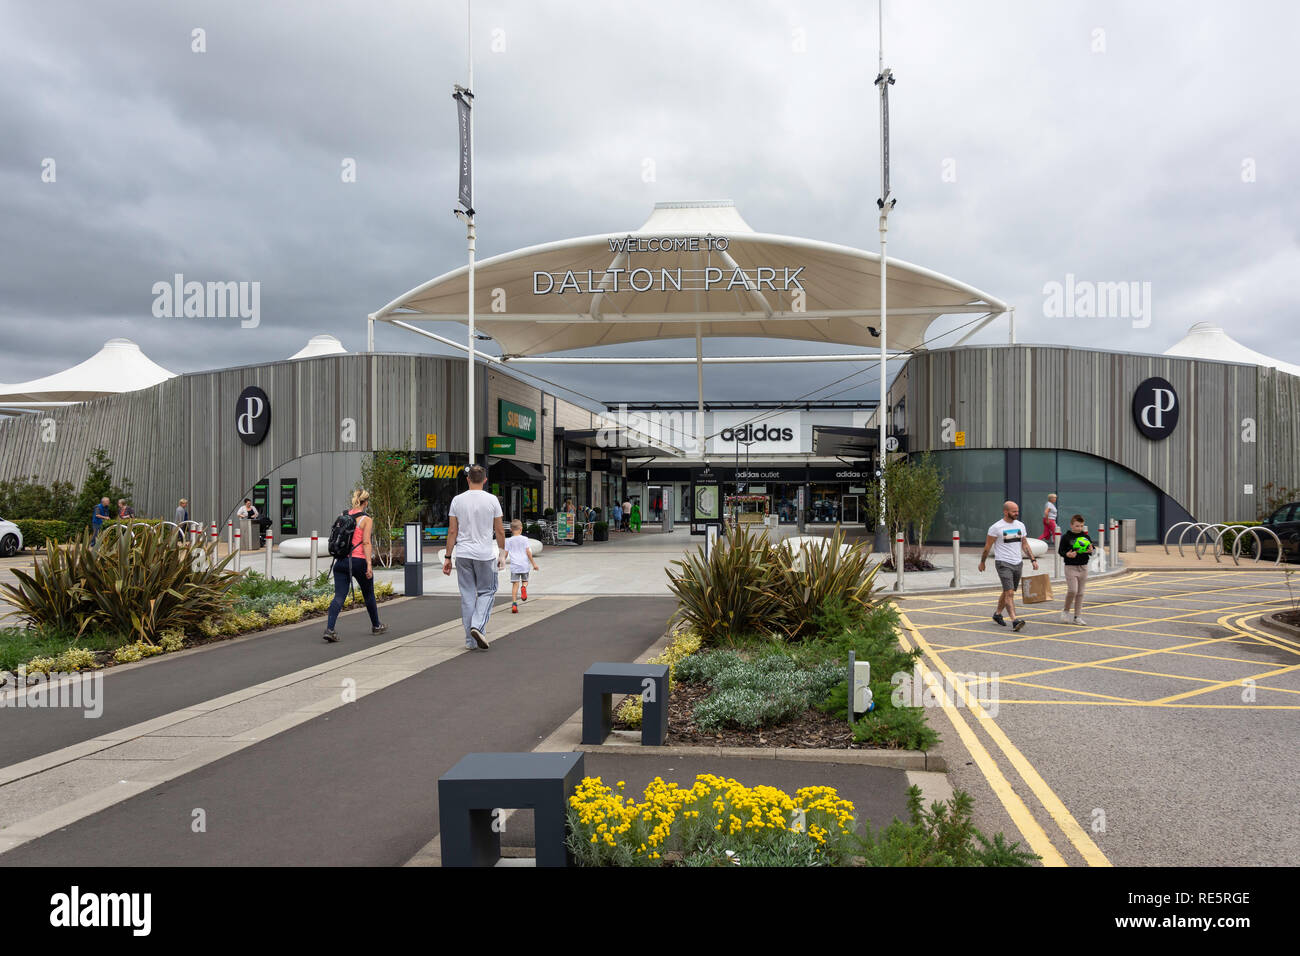 Dalton Park High Resolution Stock Photography and Images - Alamy